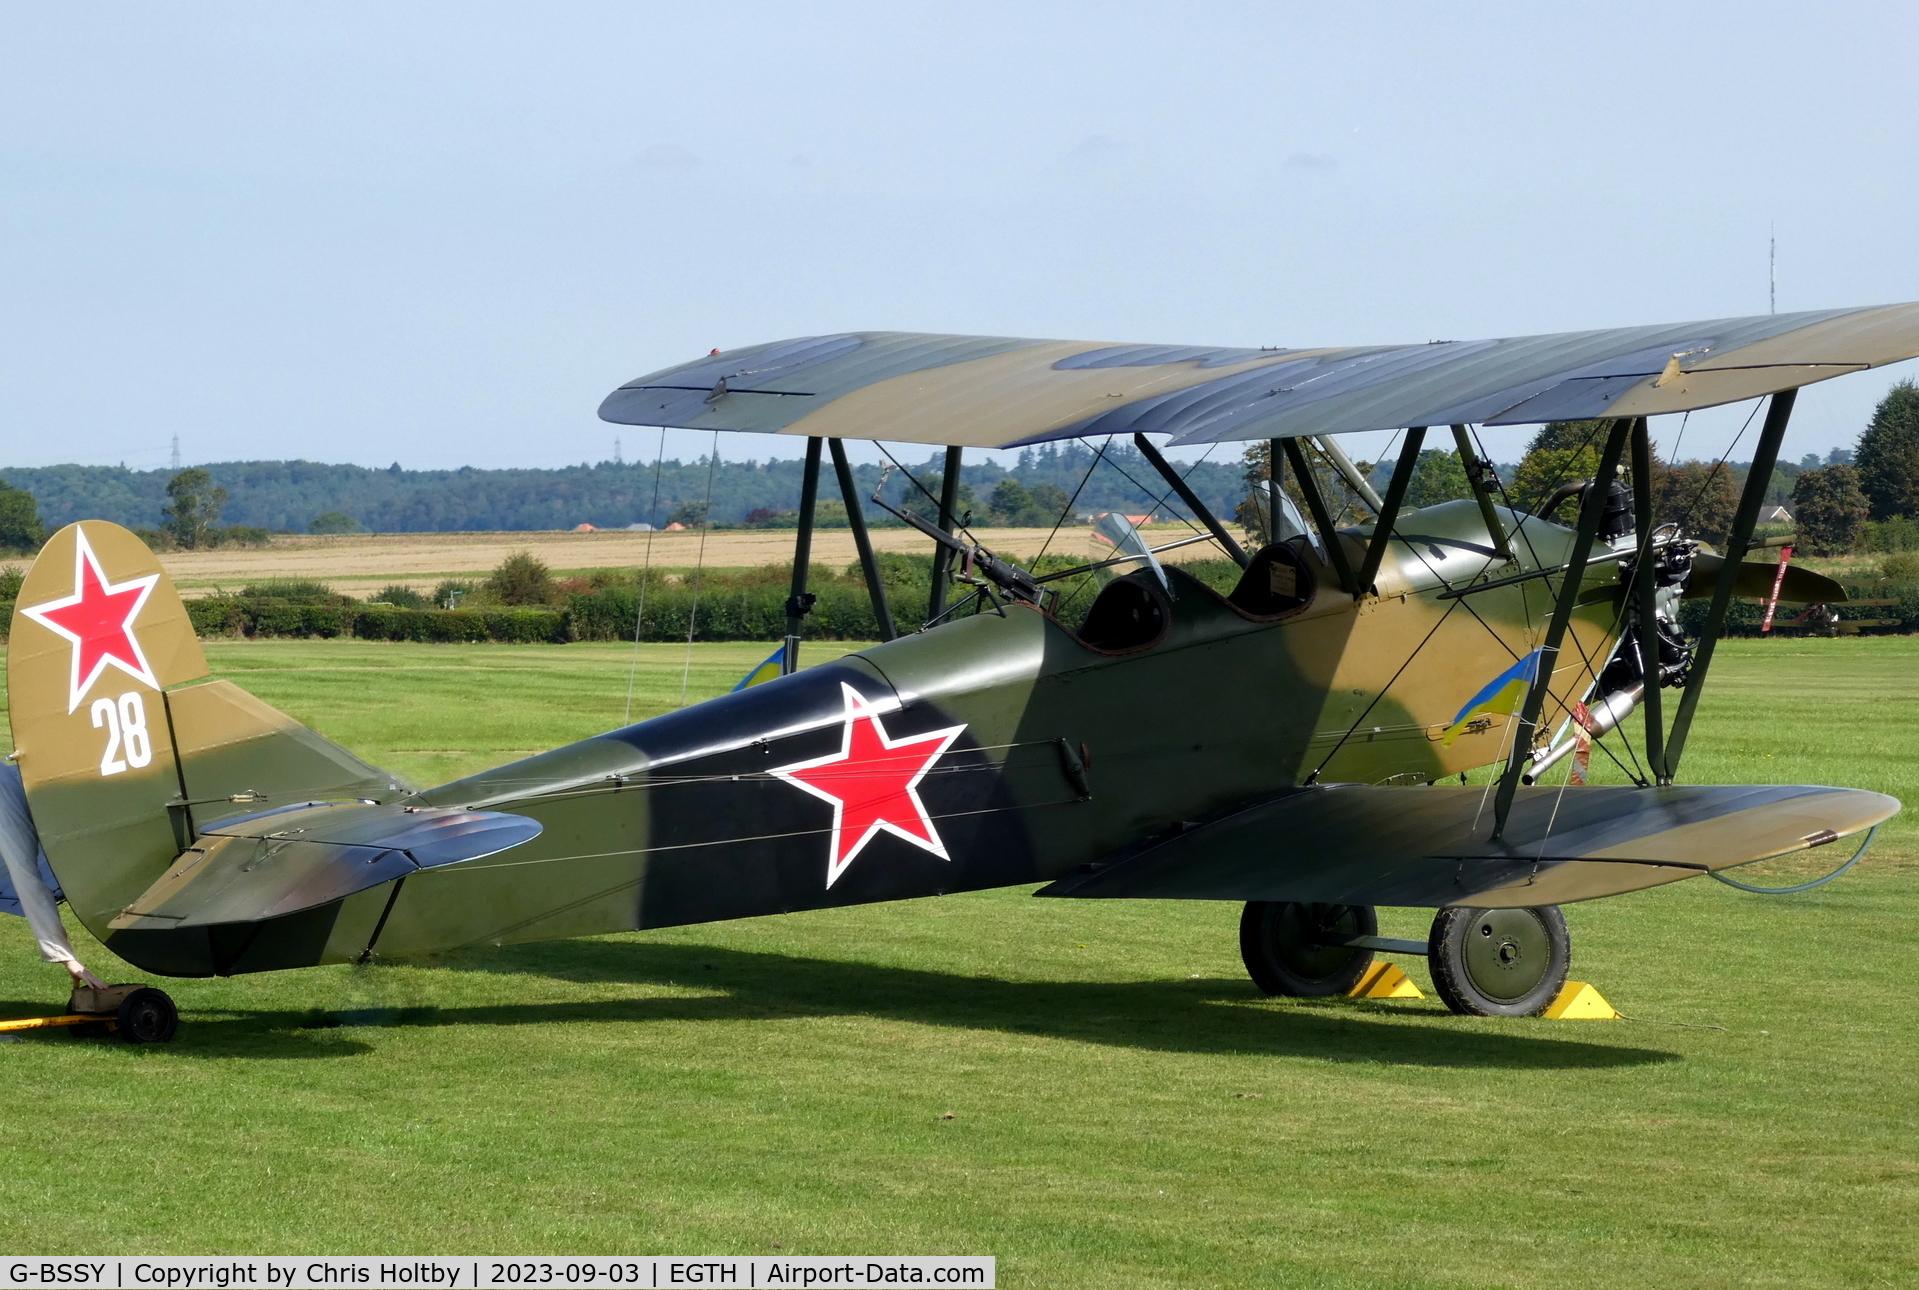 G-BSSY, 1944 Polikarpov Po-2 C/N 0094, 1944 Polikarpov rolled out for the Vintage Airshow at Old Warden 2023